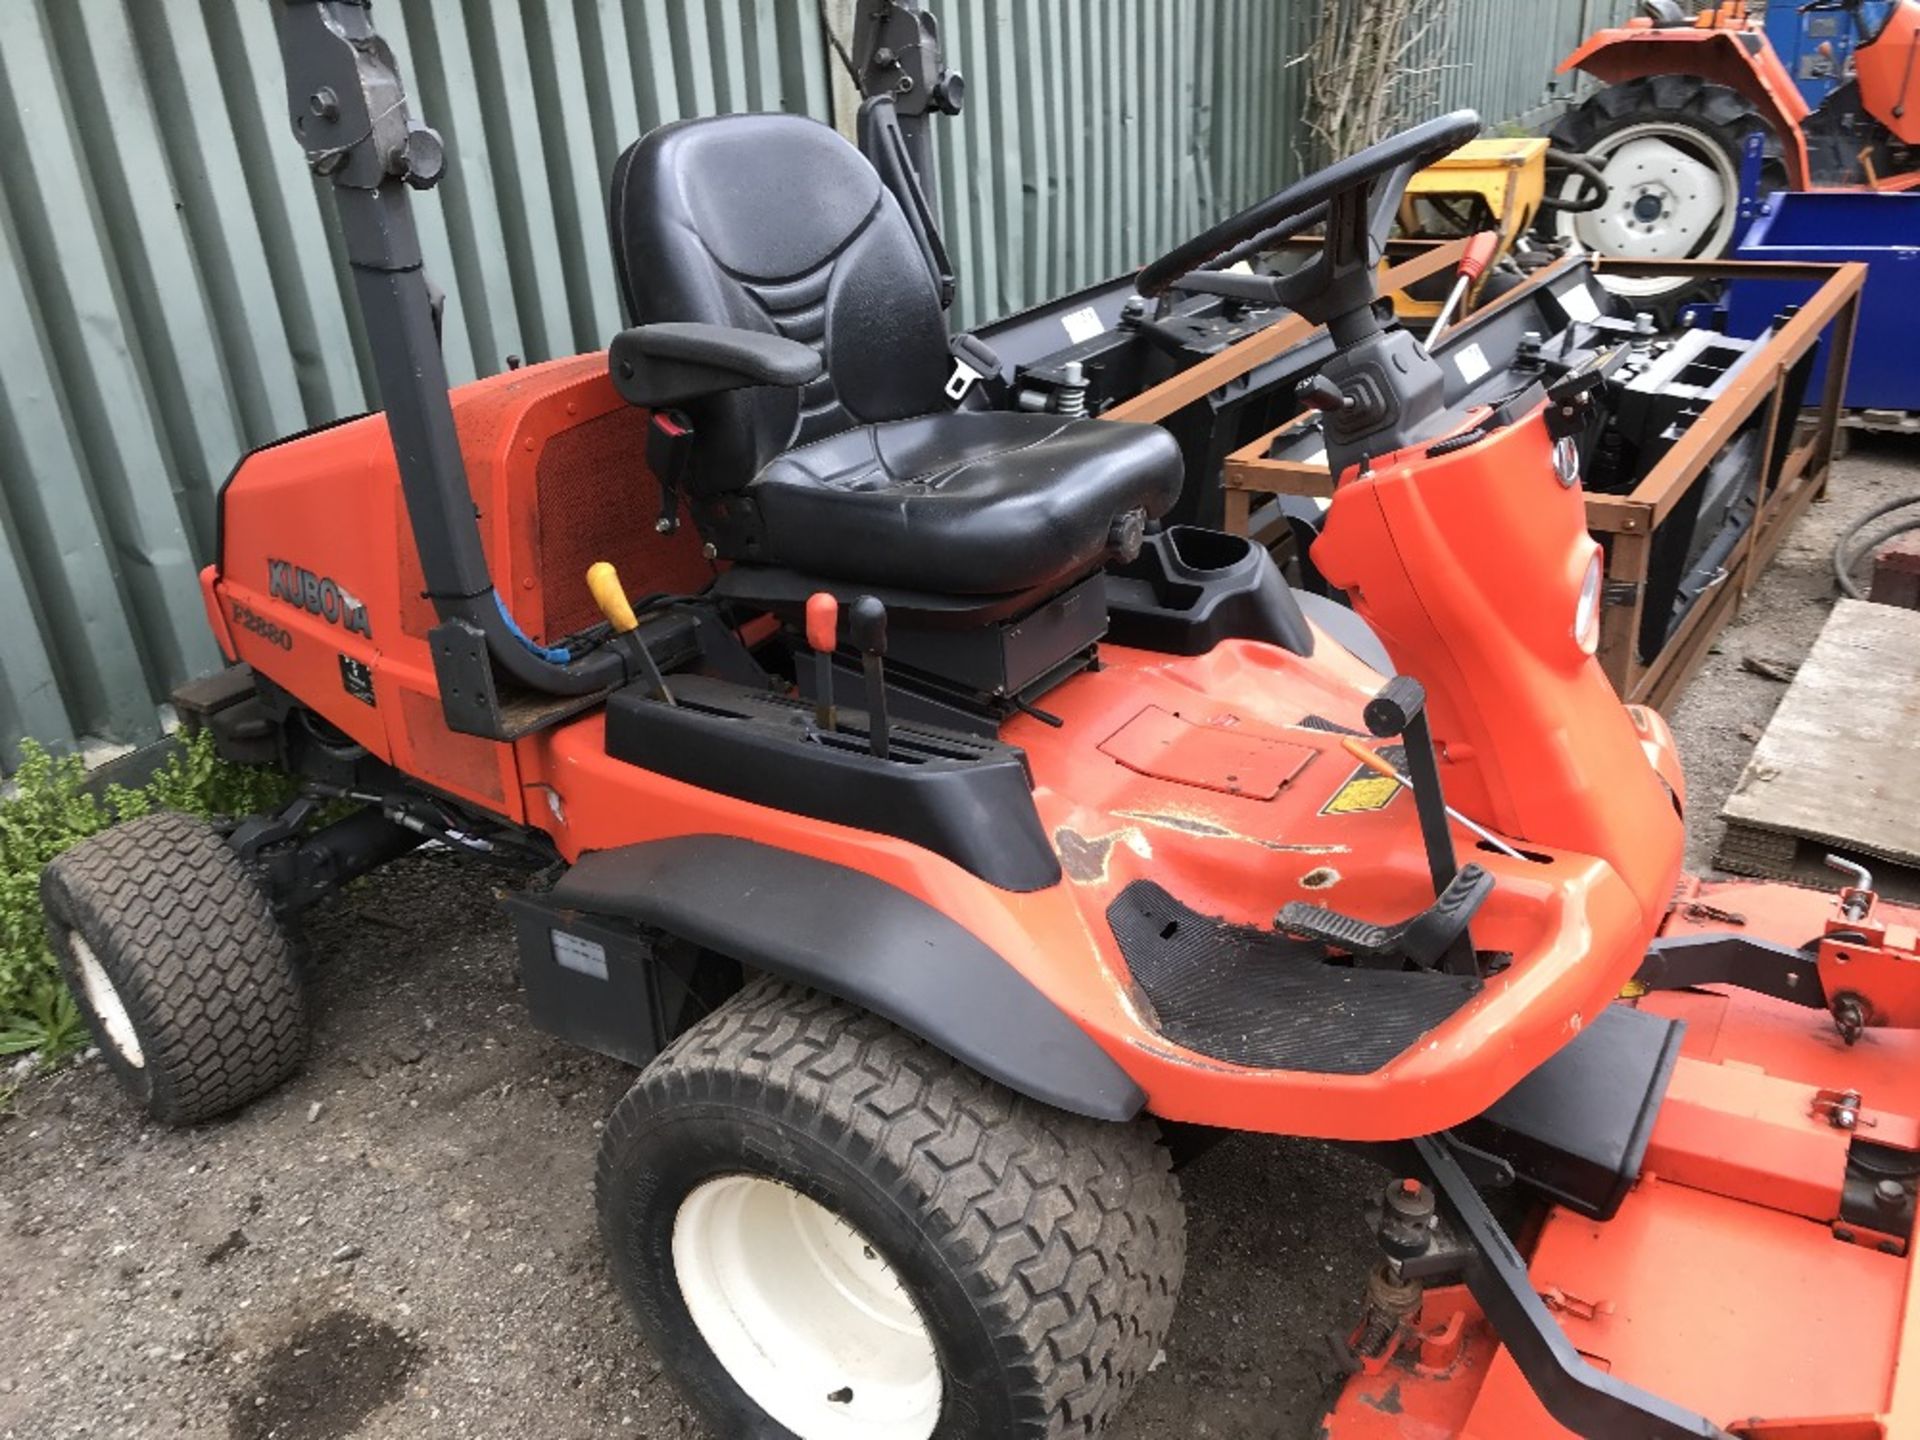 KUBOTA 2880 4WD OUTFRONT MOWER, 2670 REC.HRS. REG: SF14 HXM, V5 TO FOLLOW when tested was seen to - Image 2 of 3